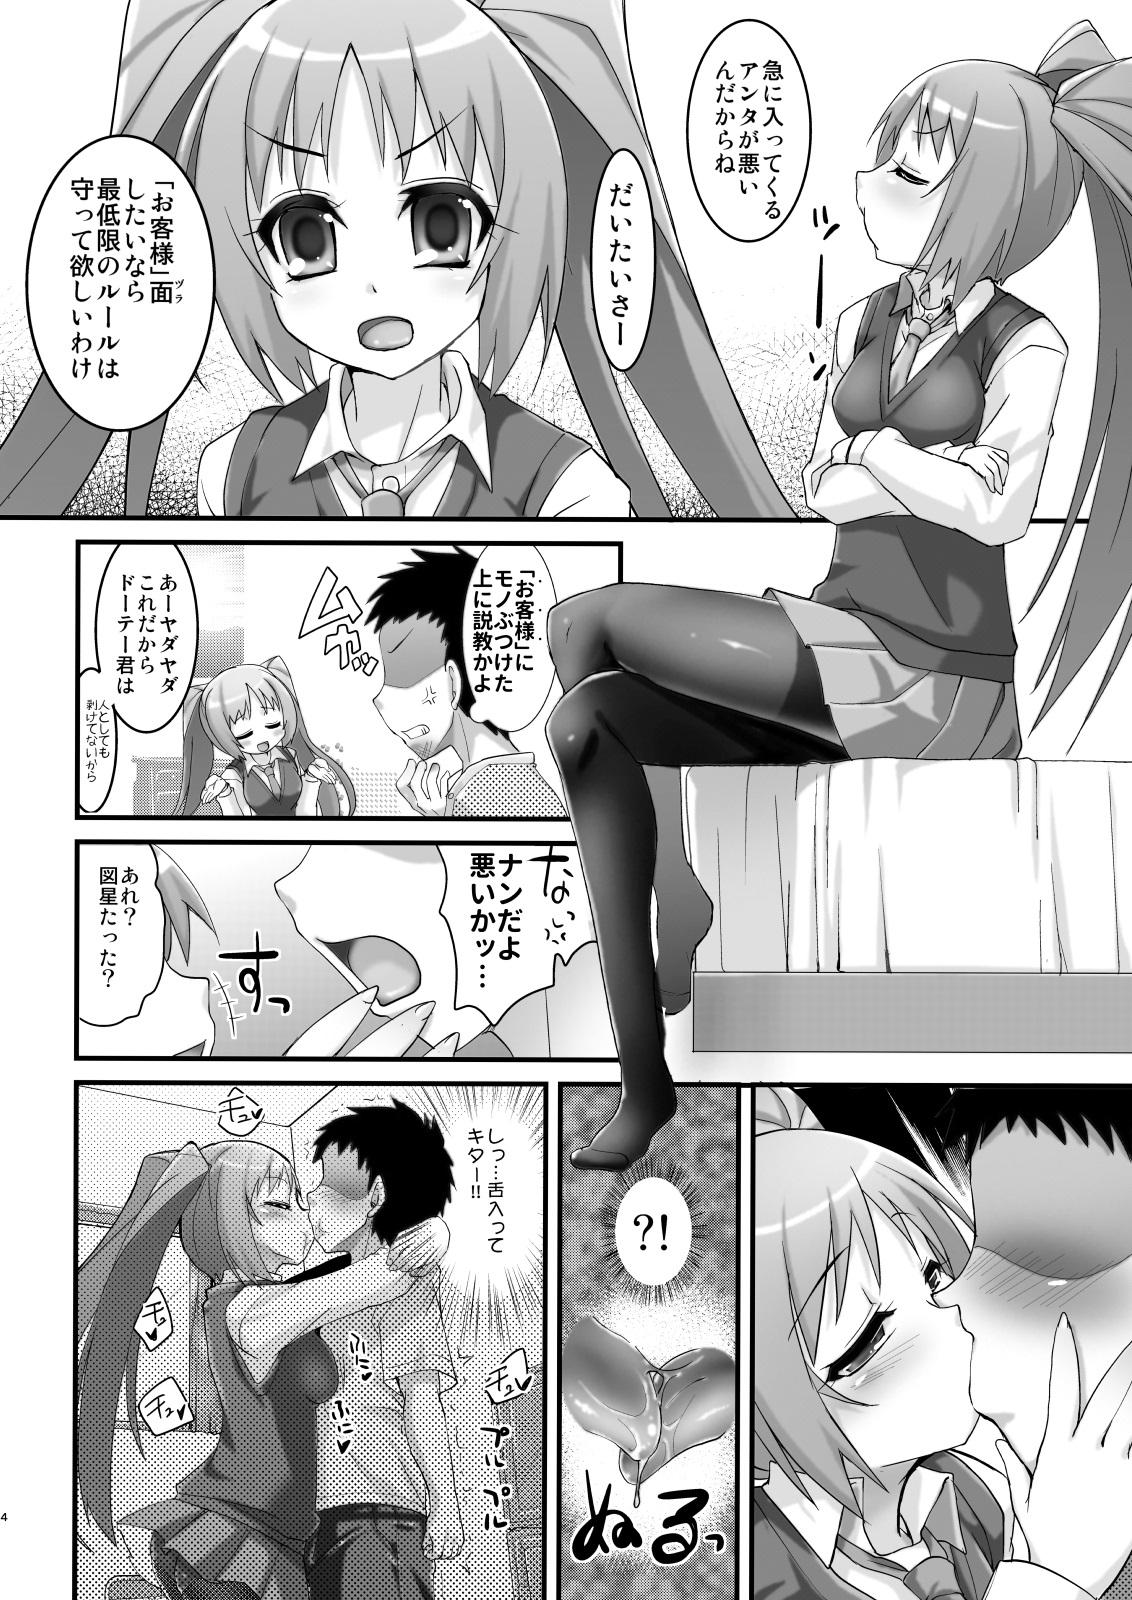 Wank Tsundere Tights to Twintails - Original Cumfacial - Page 4